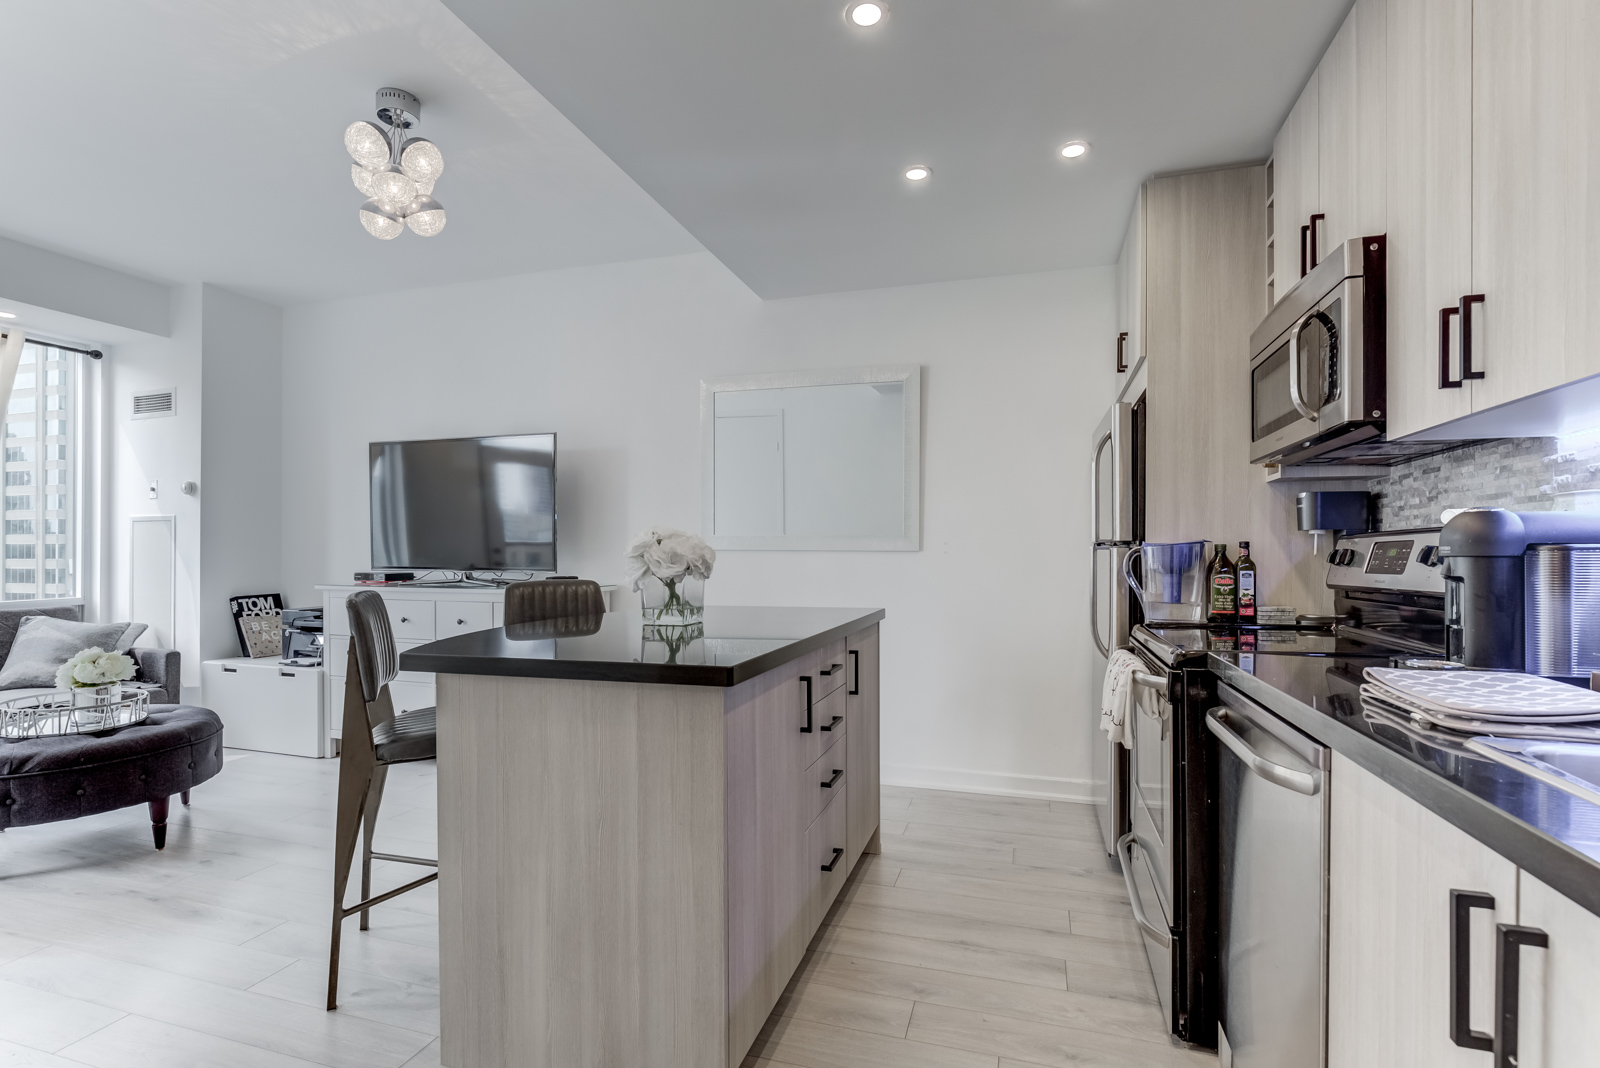 85 Bloor Unit 1814 kitchen with linear design and modern appliances.